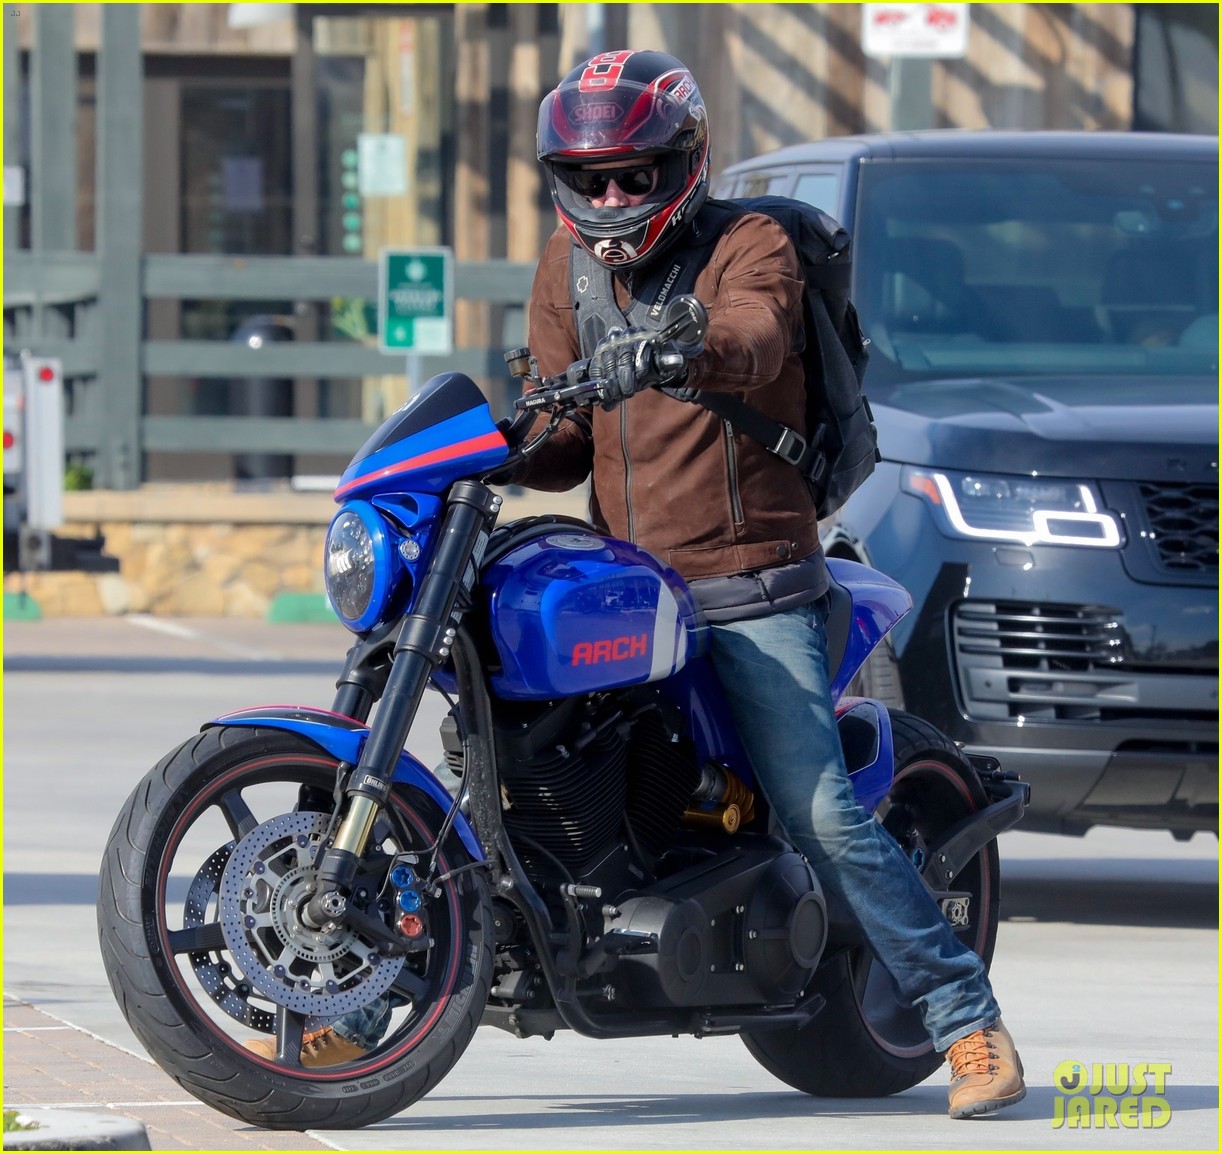 keanu reeves stopped by fans motorcycle ride 47